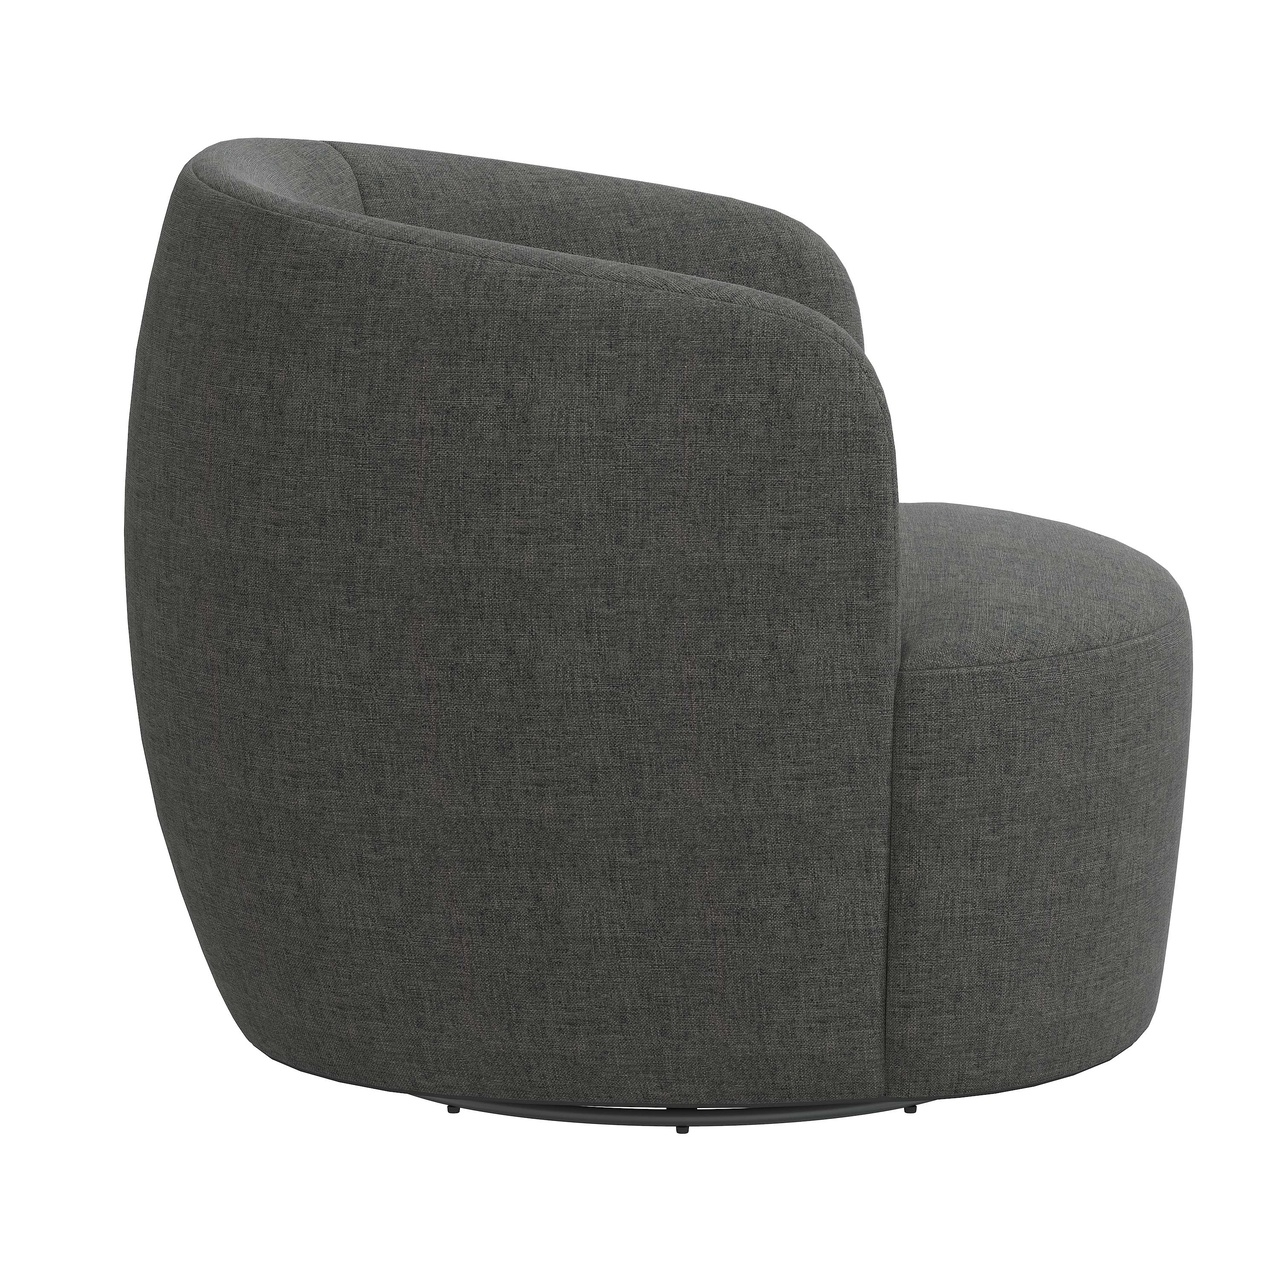 Collette Swivel Chair - Image 2